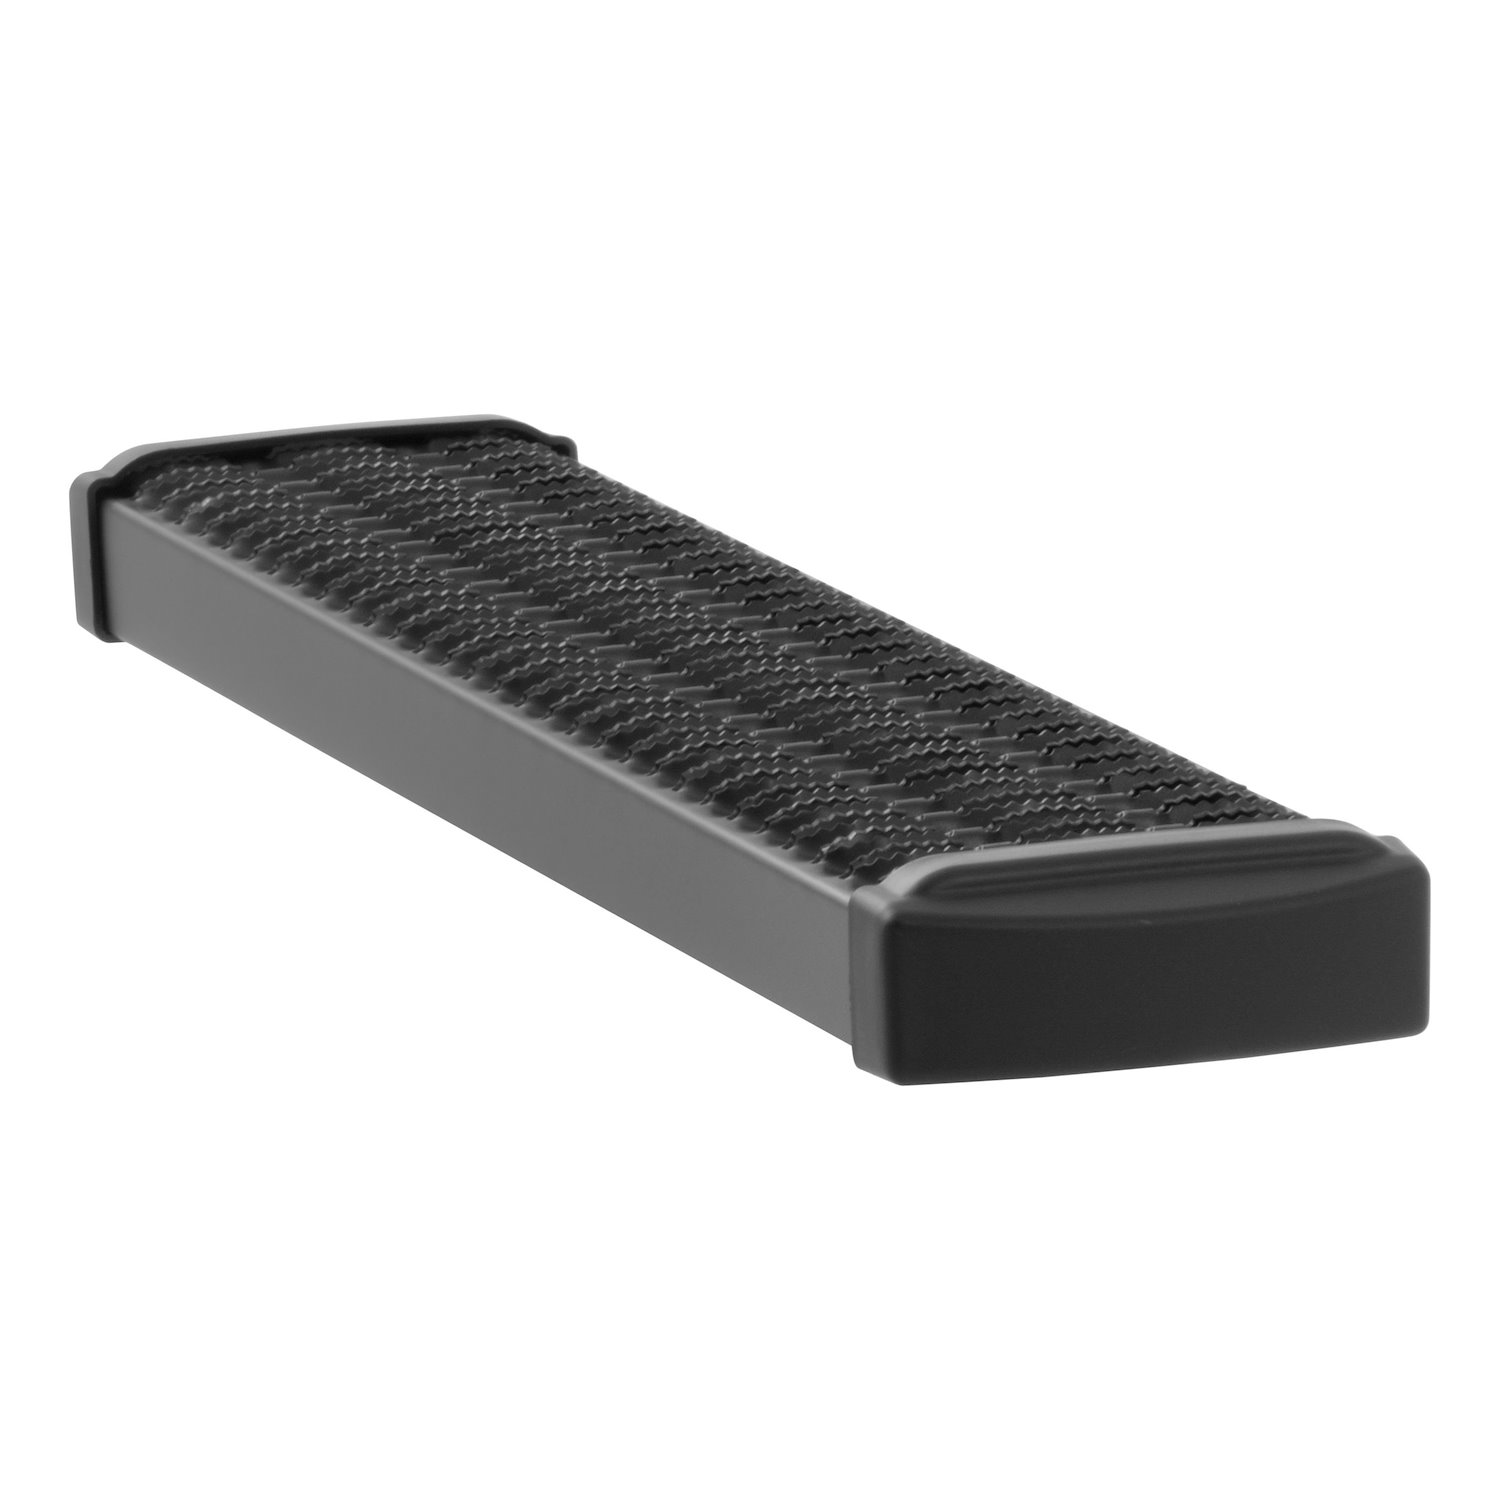 415236-401470 Grip Step 7 in. x 36 in. Black Aluminum Driver-Side Running Board Fits Select ProMaster